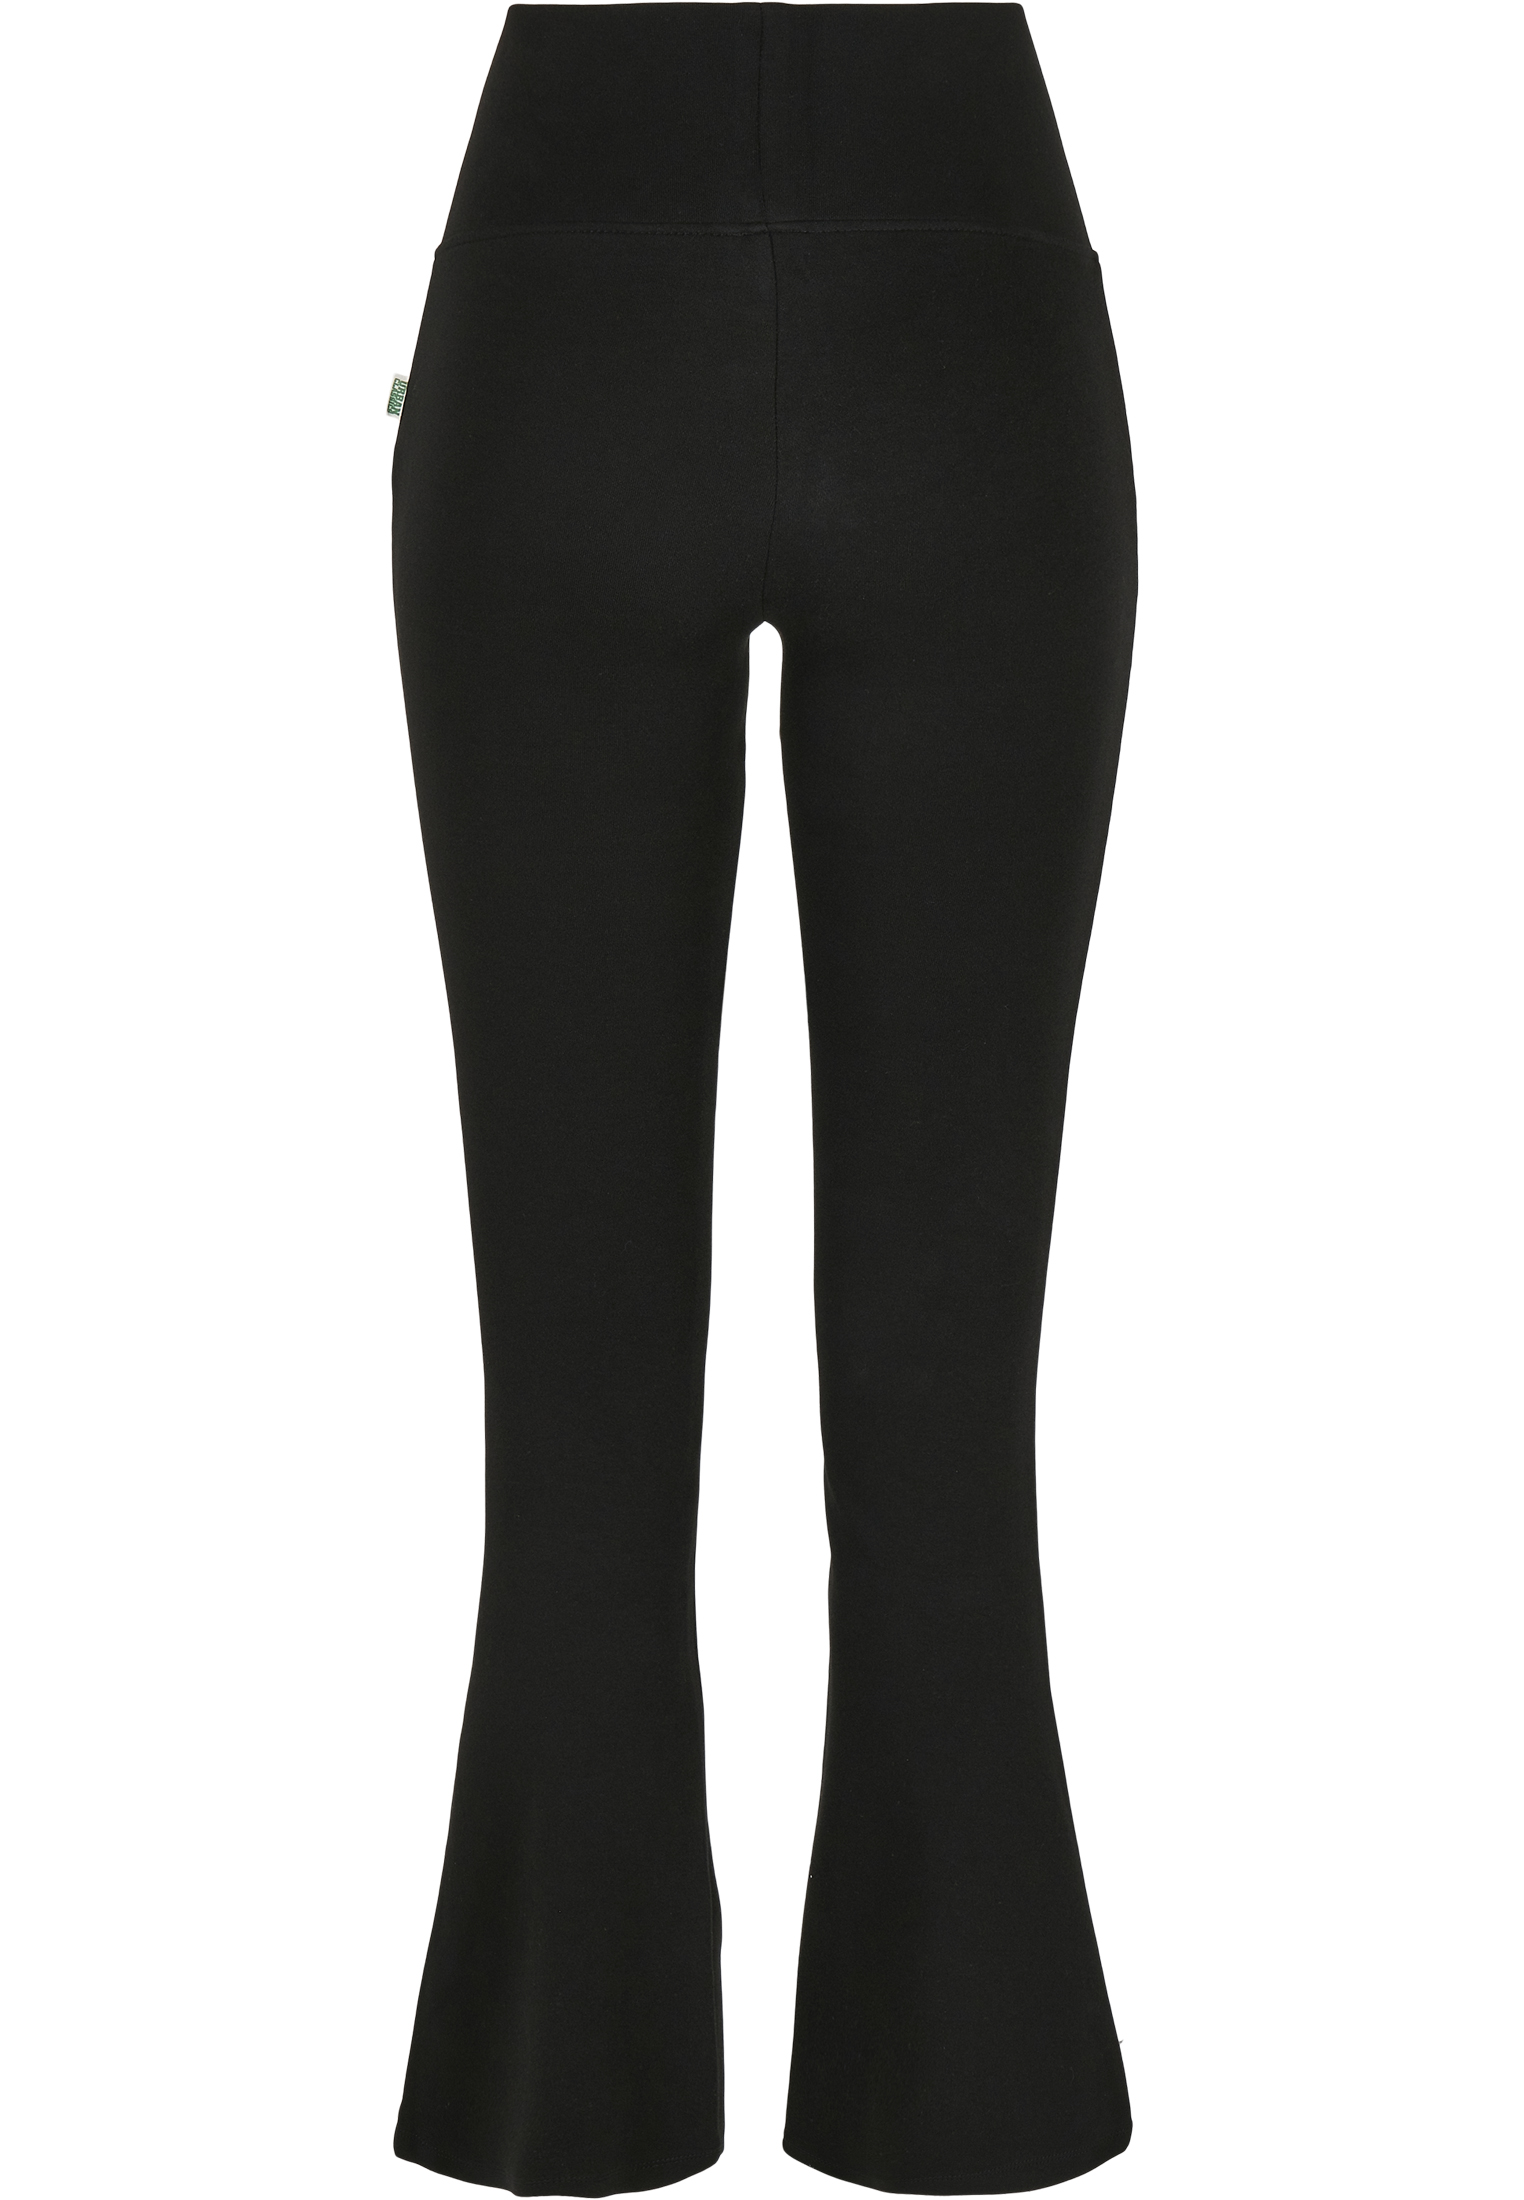 Pact Purefit Bootcut Leggings - 26 Black MD 26 at  Women's Clothing  store